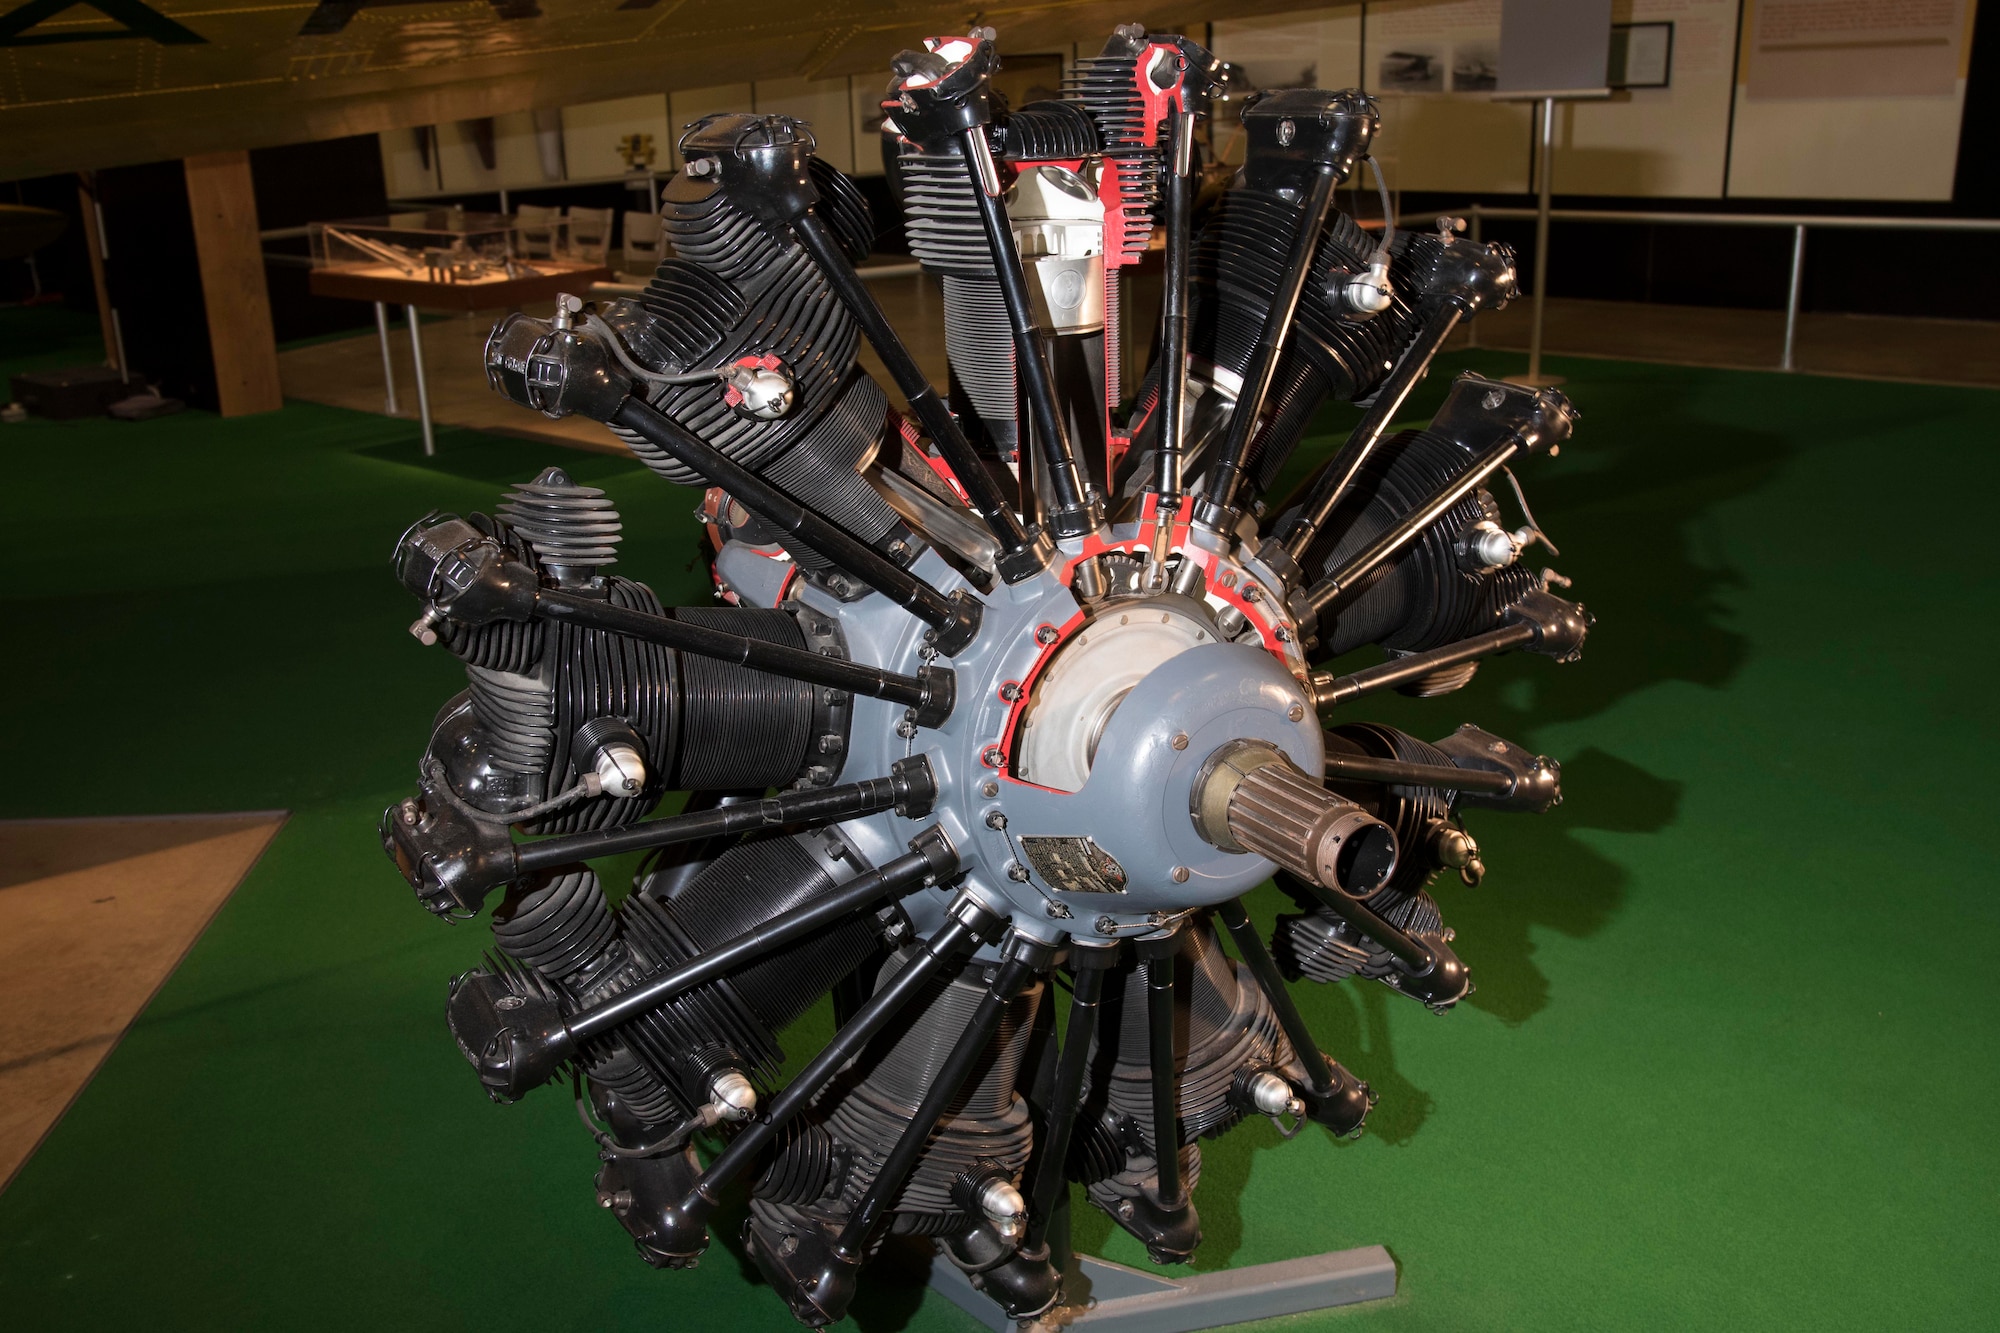 Wright R-1820 engine on display in the Early Years Gallery at the National Museum of the United States Air Force. (U.S. Air Force photo)